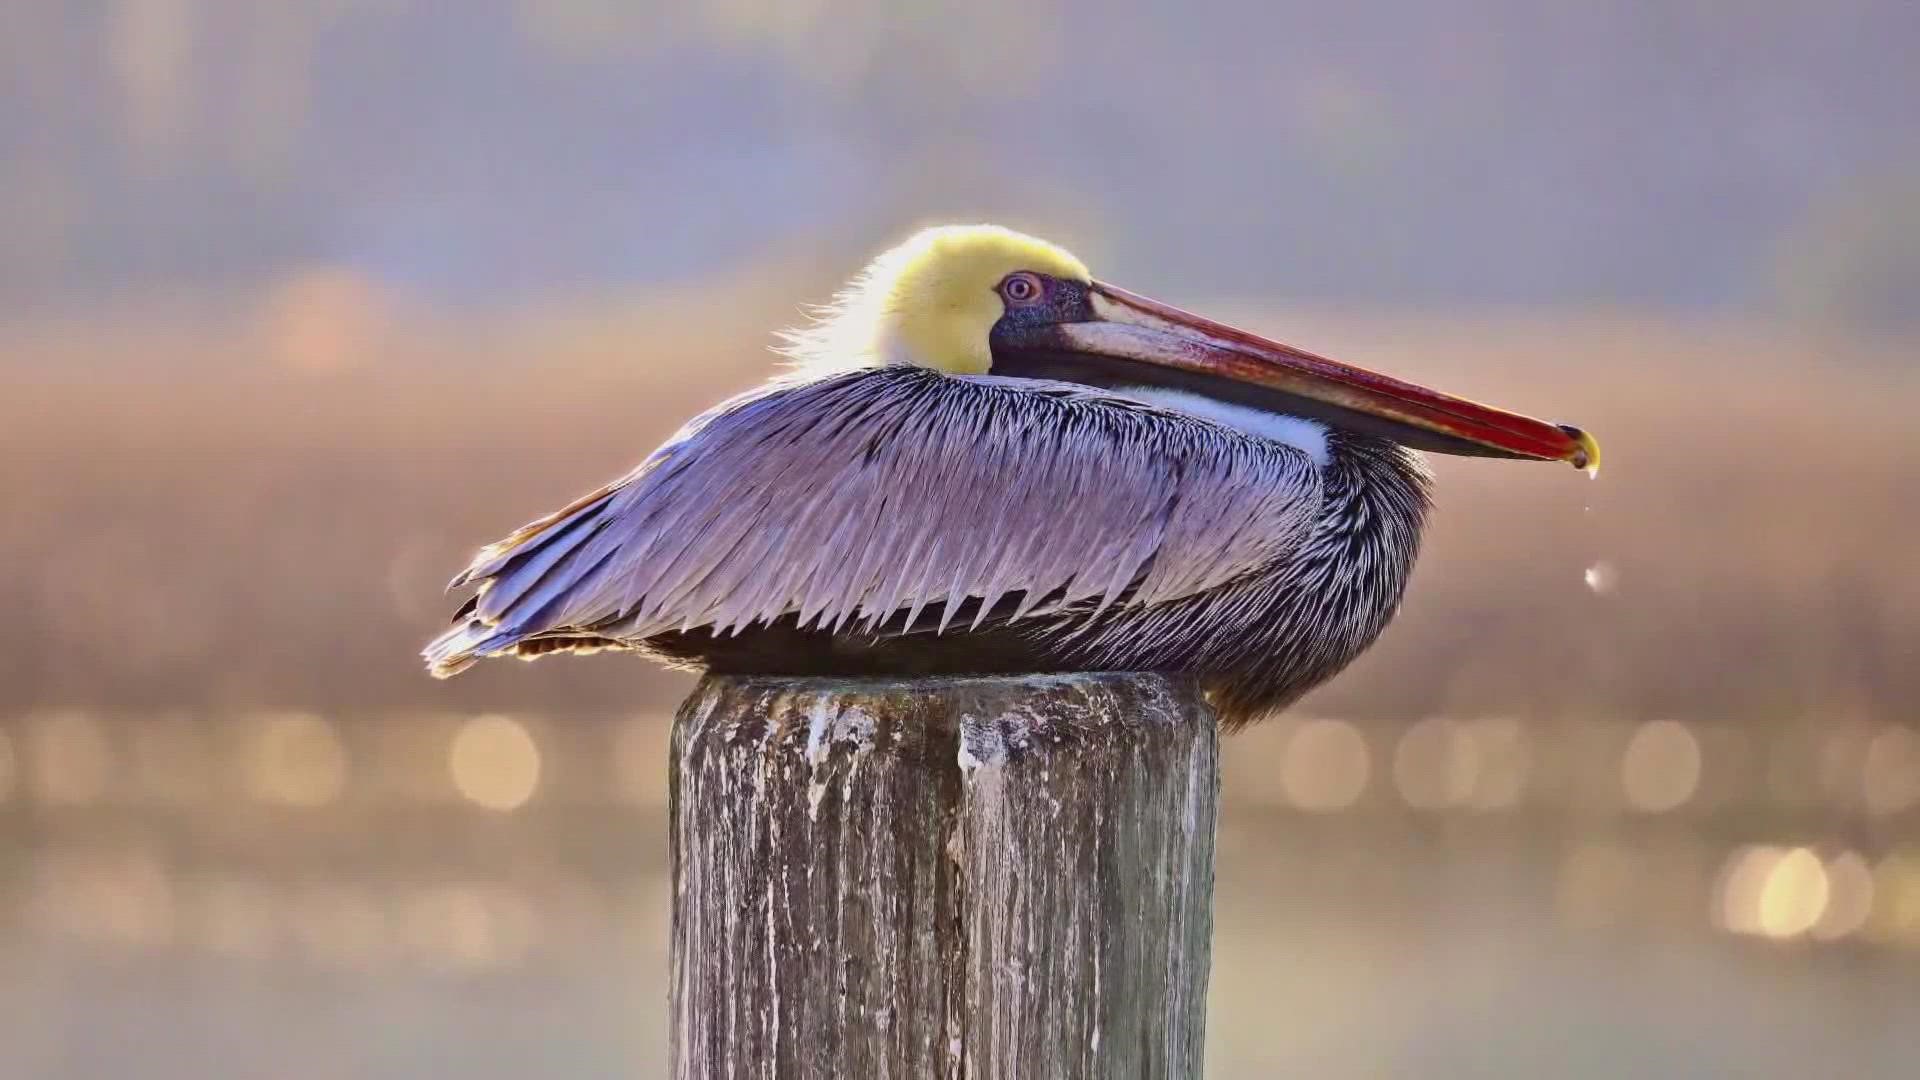 Brunswick photographer Glenn Michaels' picture of a pelican at Hilton's Head will be featured on the National Wildlife Federations holiday card.